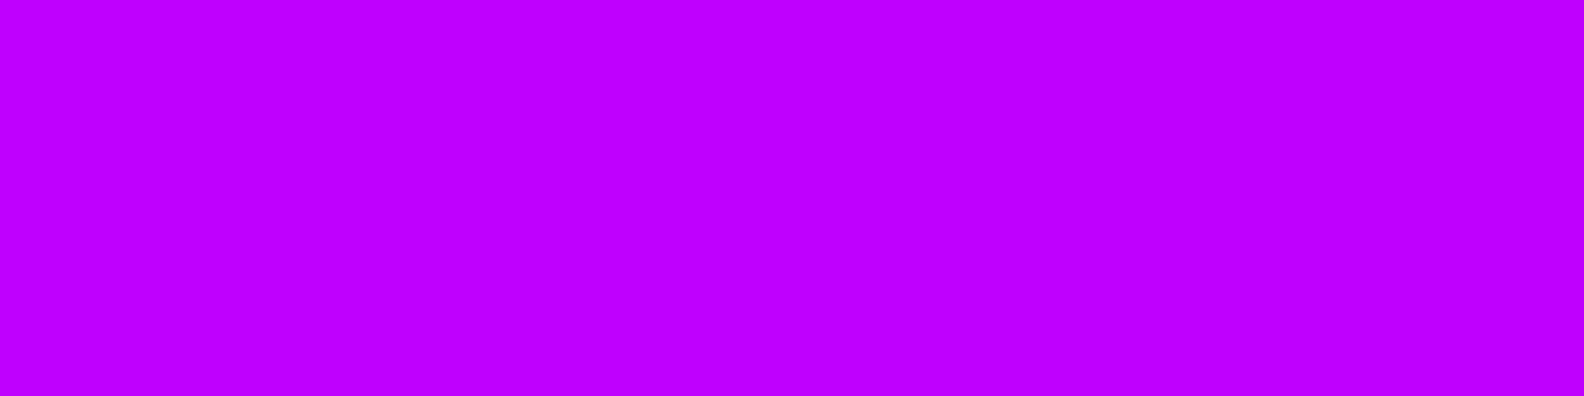 1584x396 Electric Purple Solid Color Background